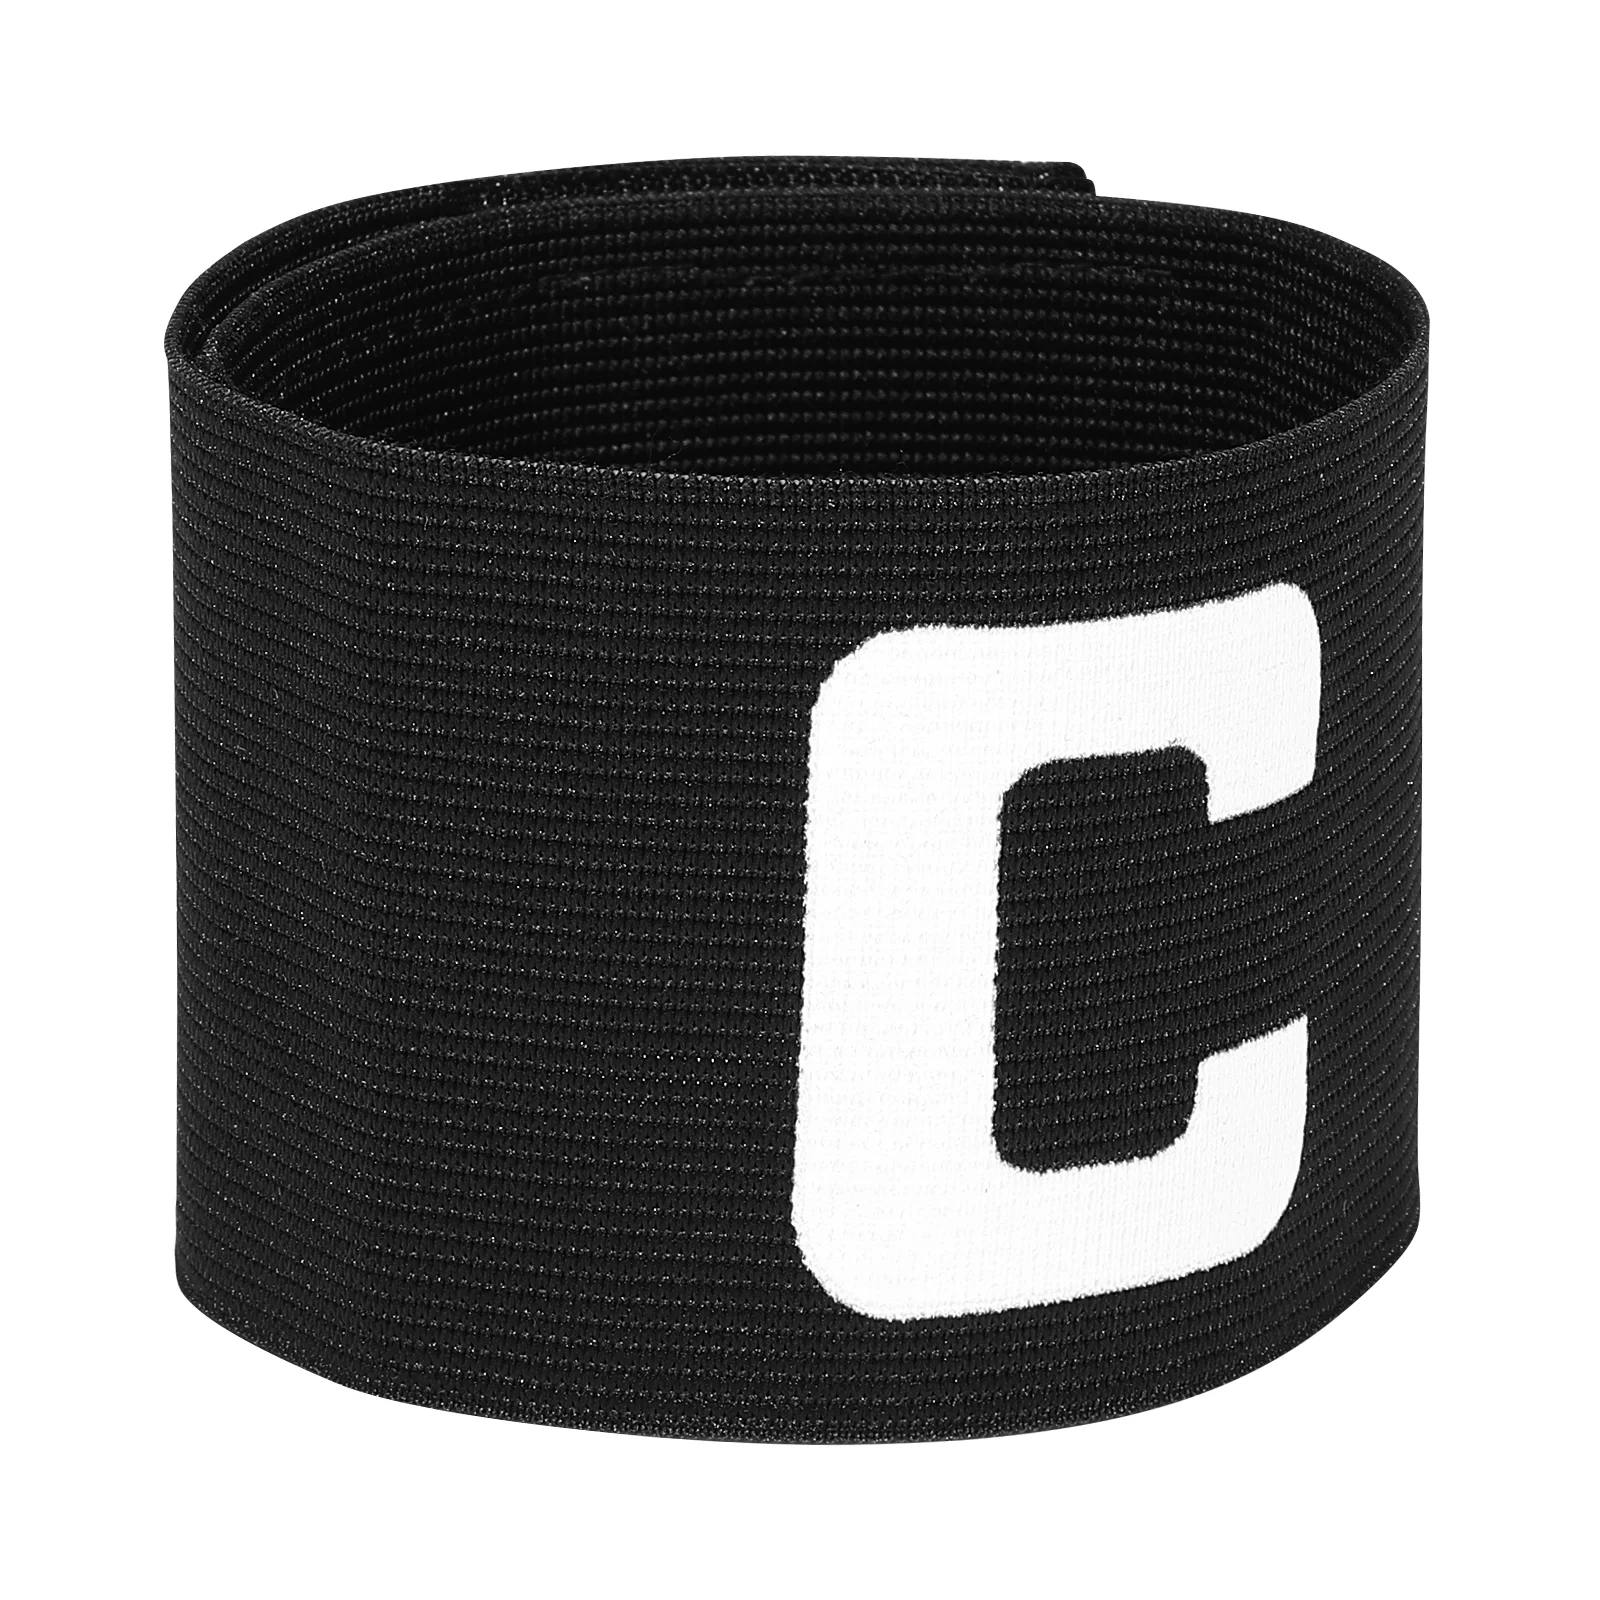 

Captain Armband Soccer Bands Arm Football Captains Band Adult Armbands Softball Youth Adjustable Accessories Sports Drop Anti